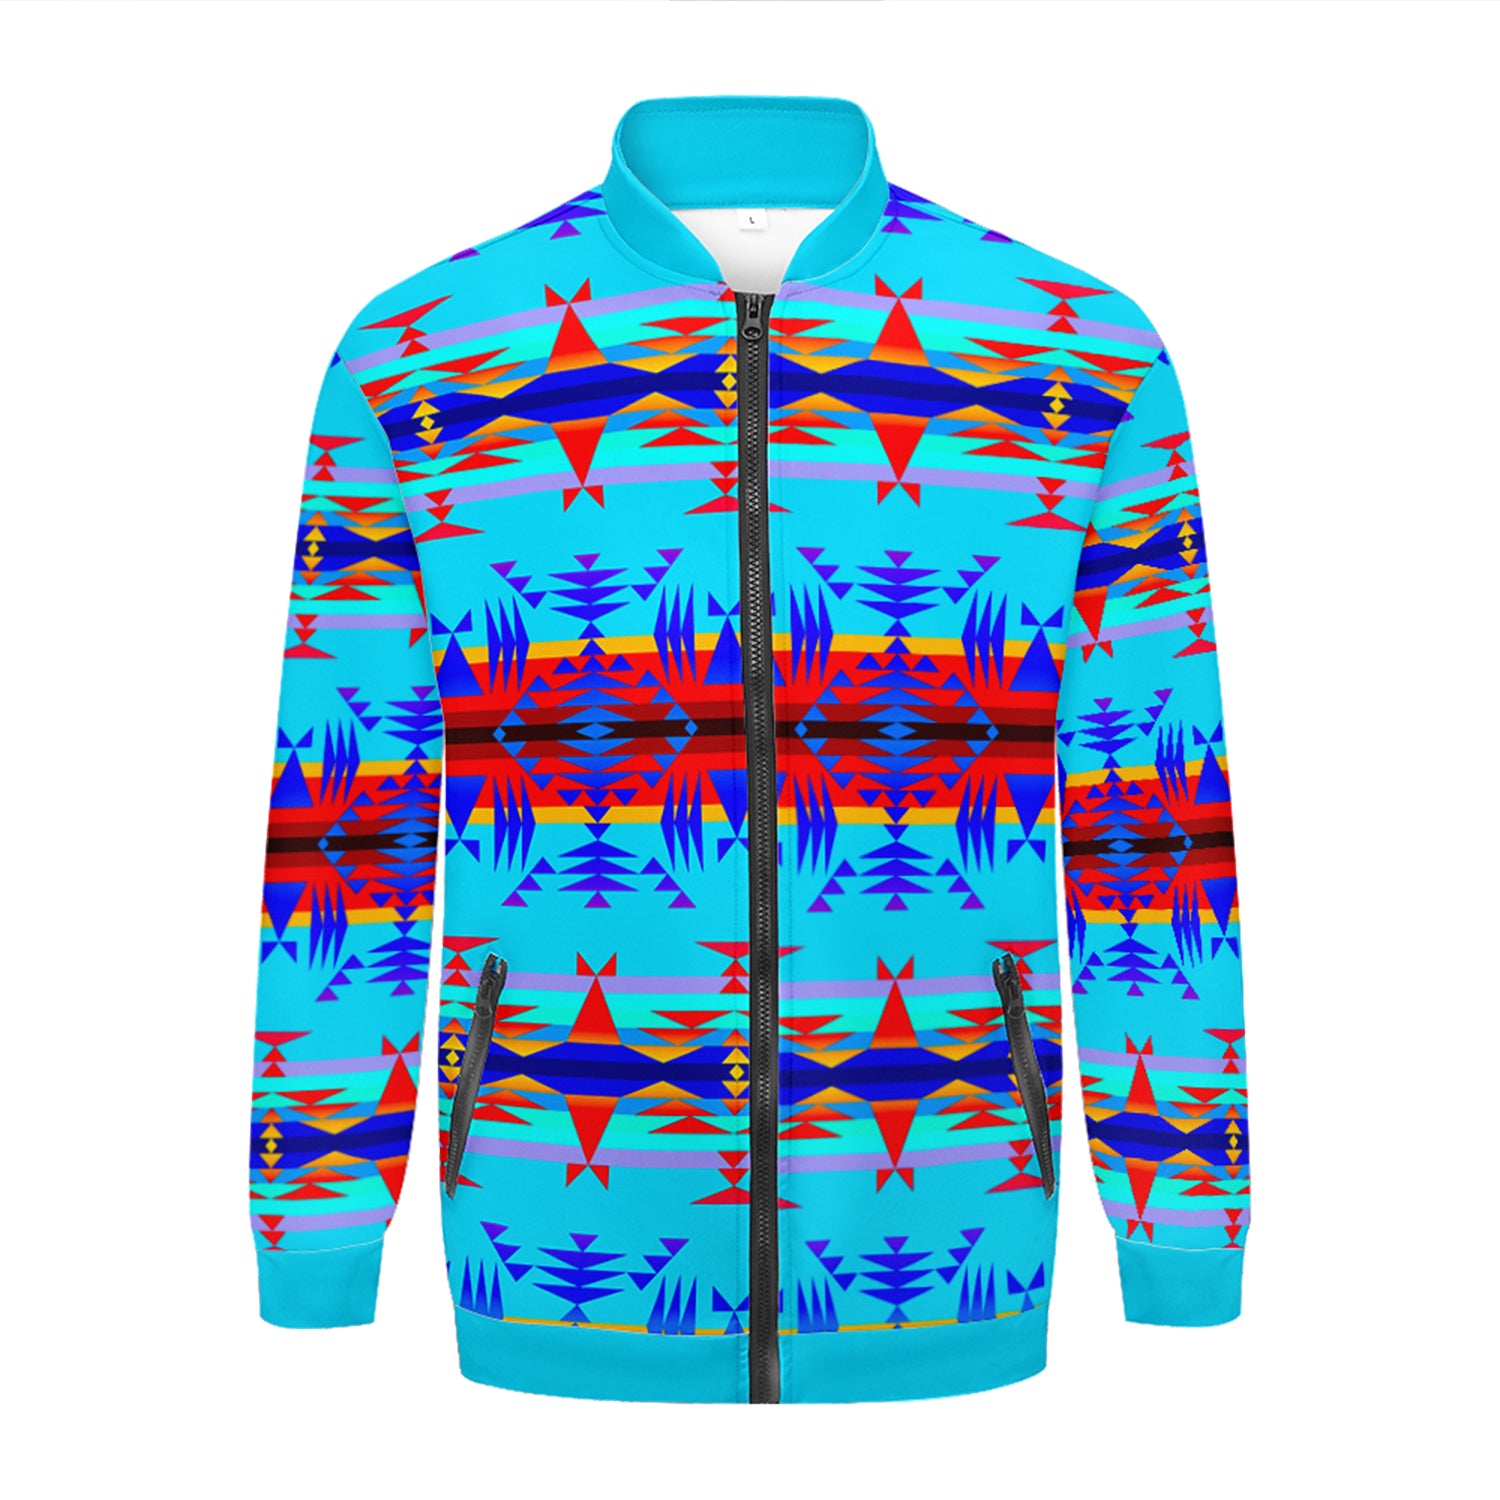 Between the Mountains Blue Youth Zippered Collared Lightweight Jacket